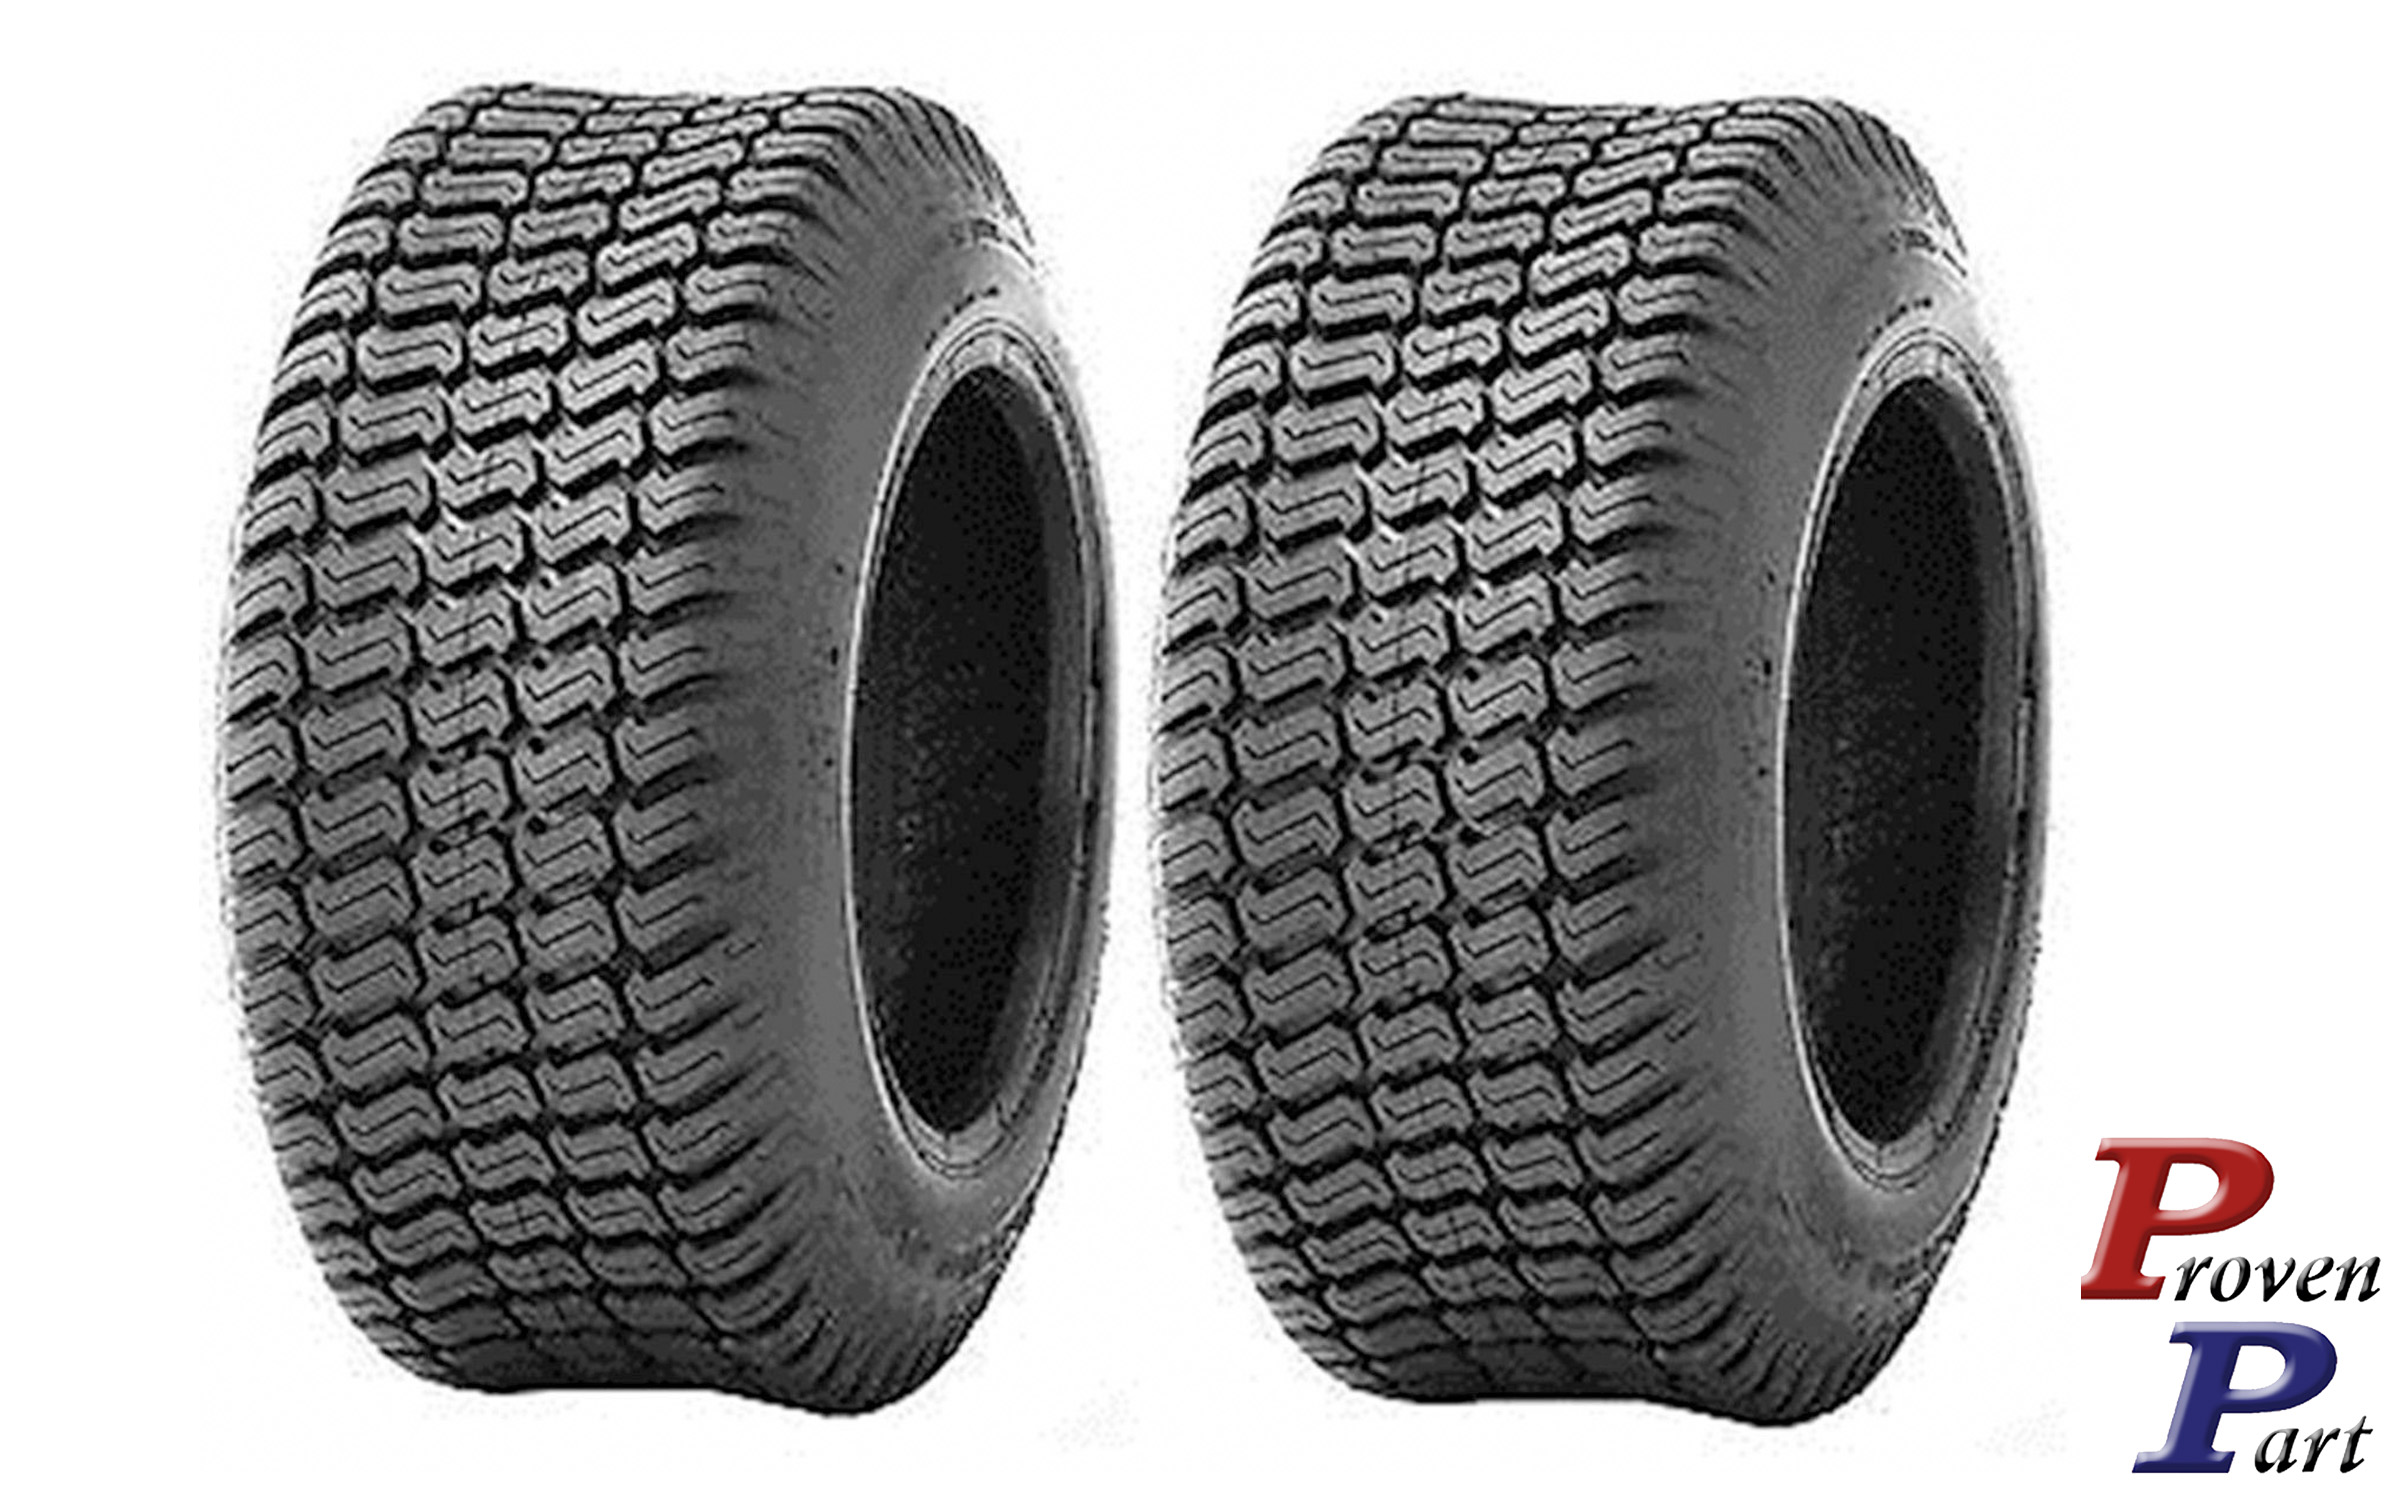 Set of 2 lawn mower tires PROMASTER 18X8.50-8 505 tubeless 4 Ply - Click Image to Close